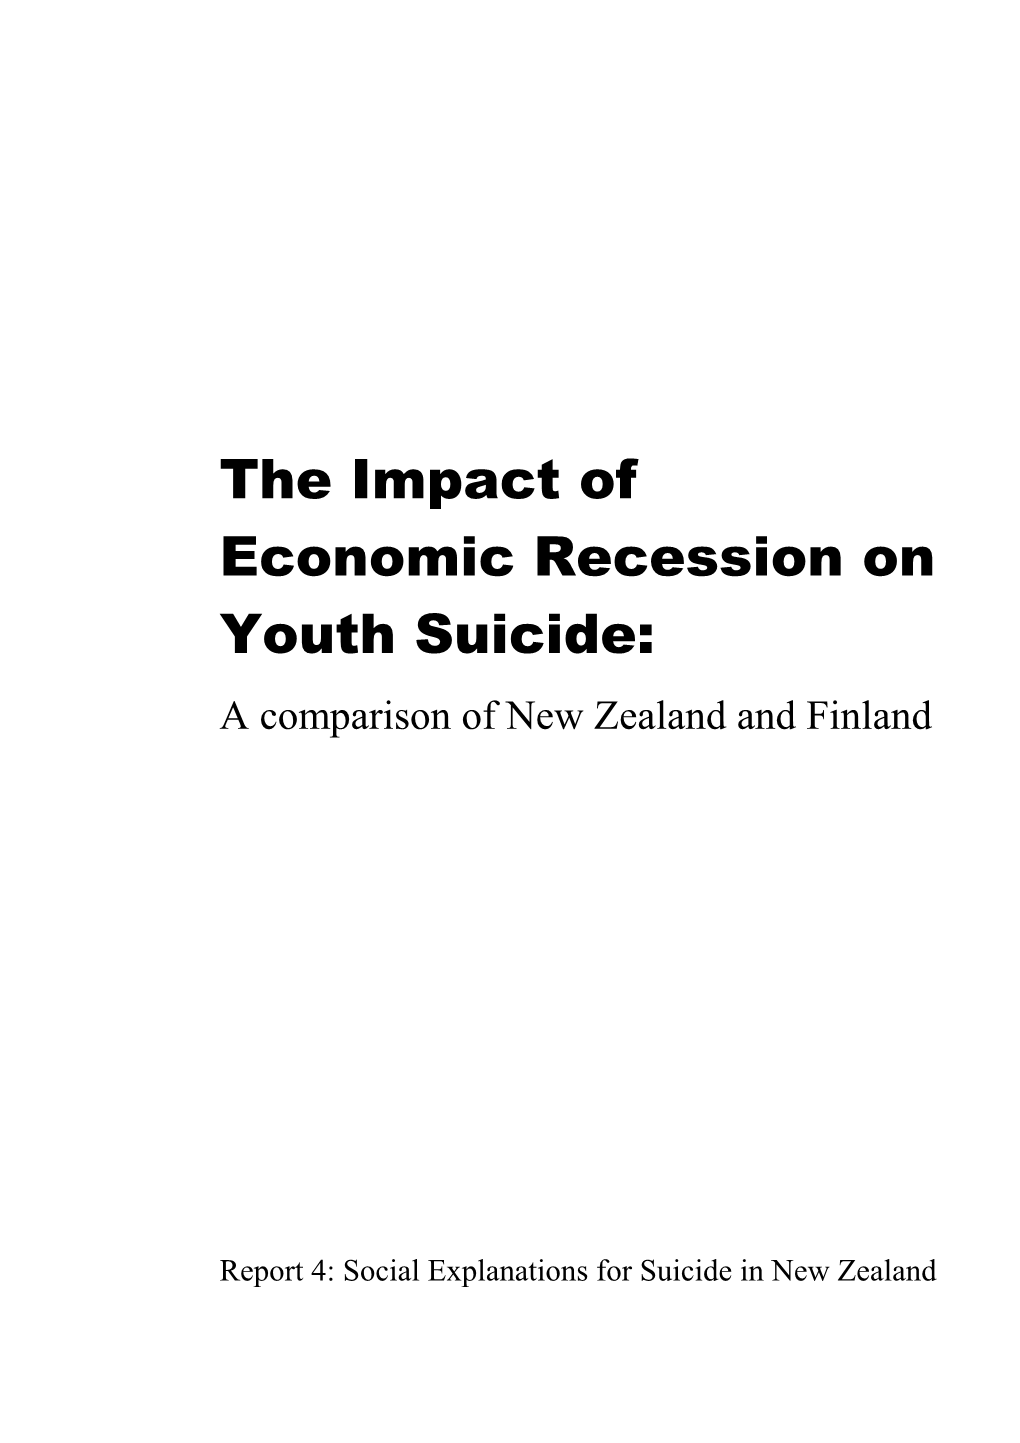 The Impact of Economic Recession on Youth Suicide